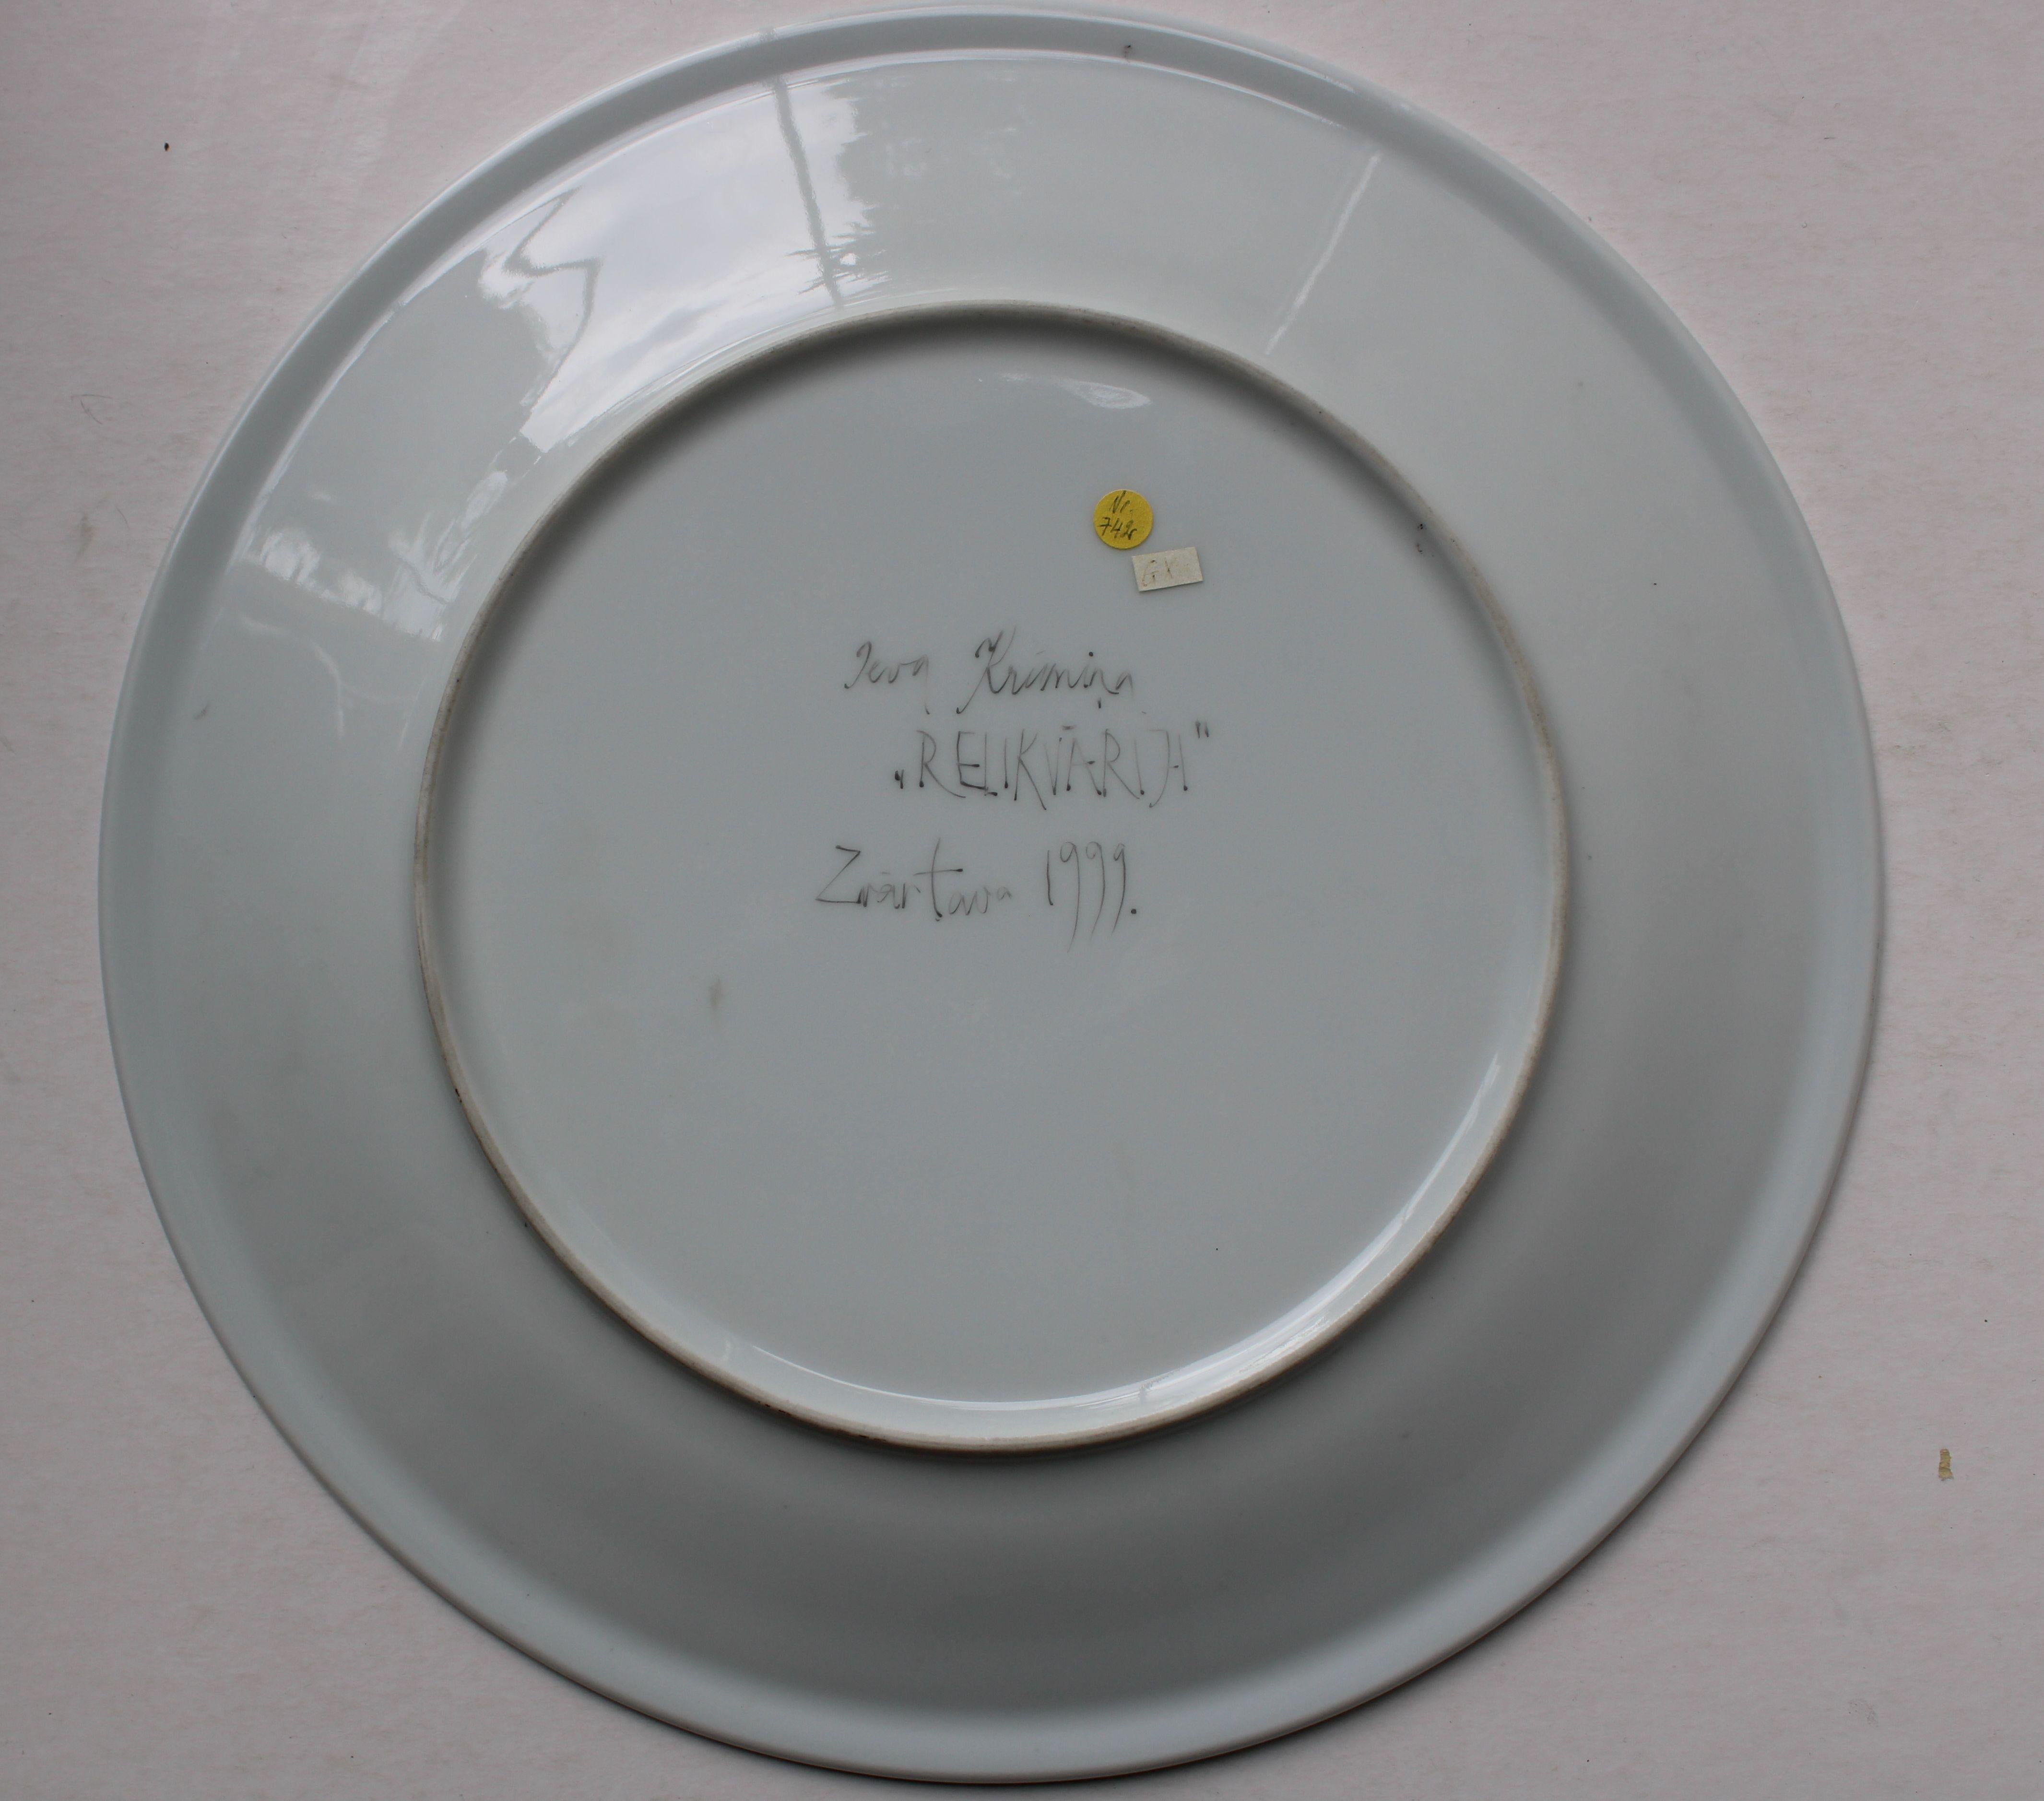 Relic  1999, painted porcelain plate, dia. 31 cm For Sale 1